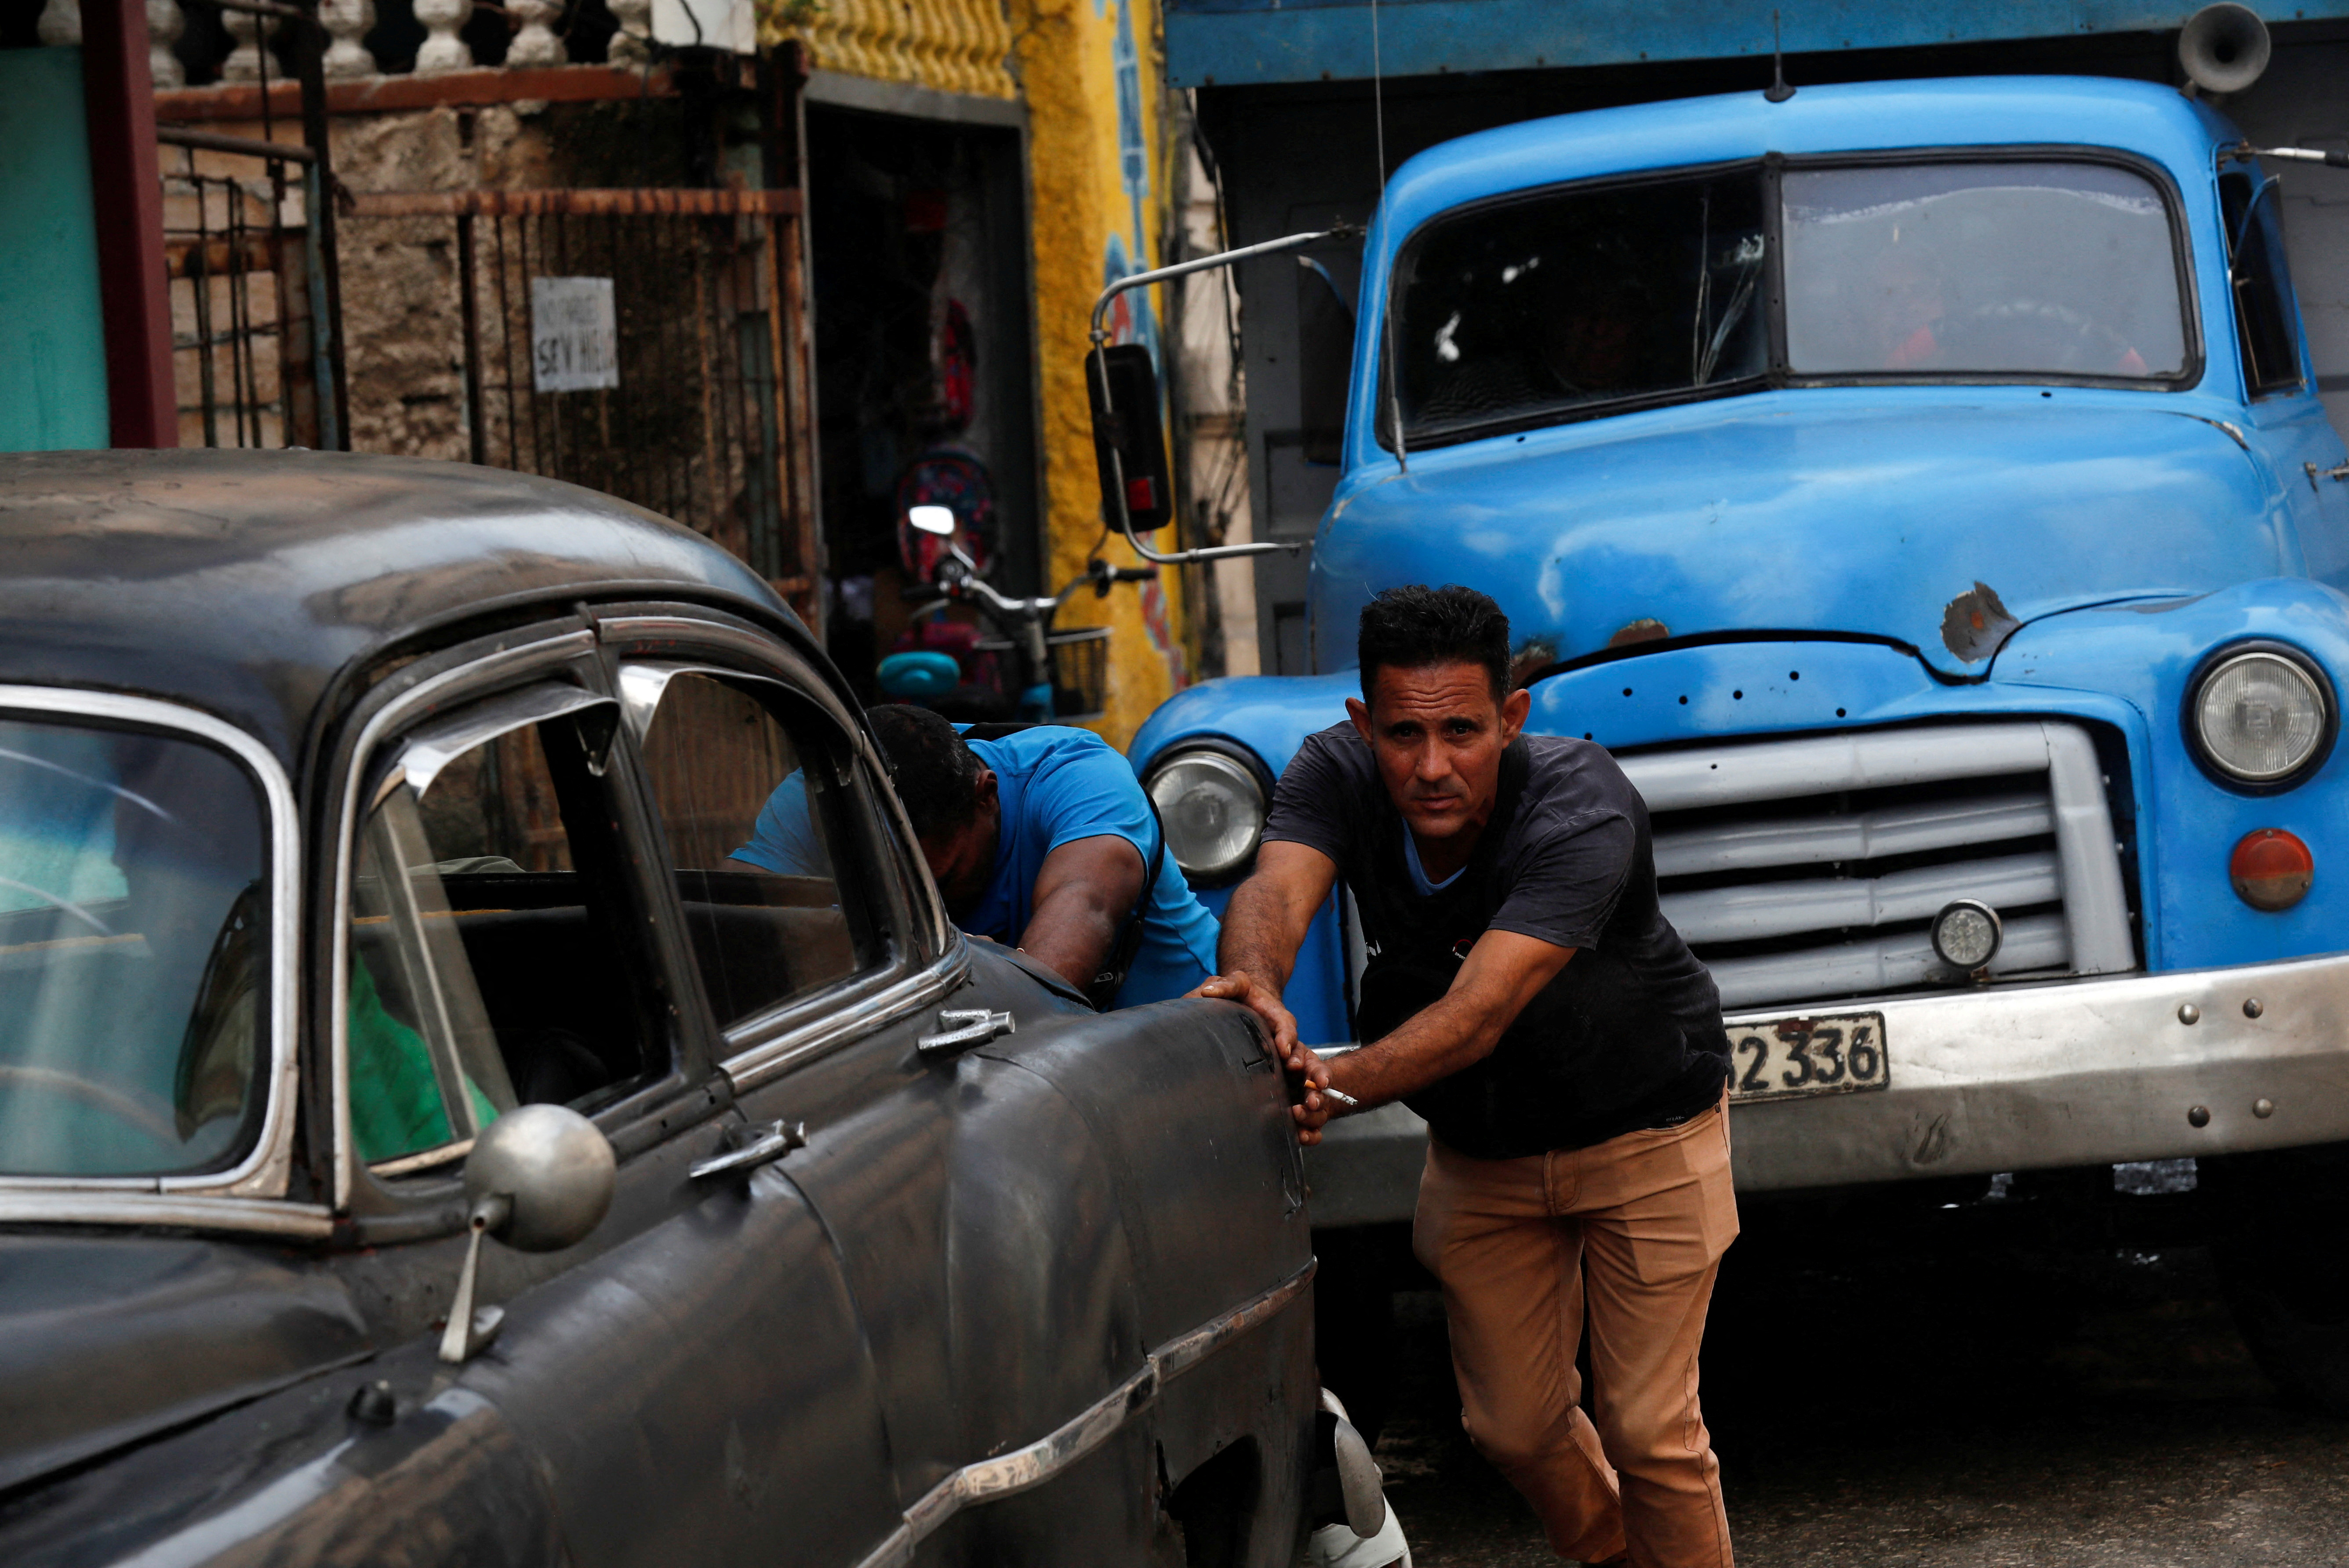 Cuba to implement five-fold hike in price of 94-octane gasoline